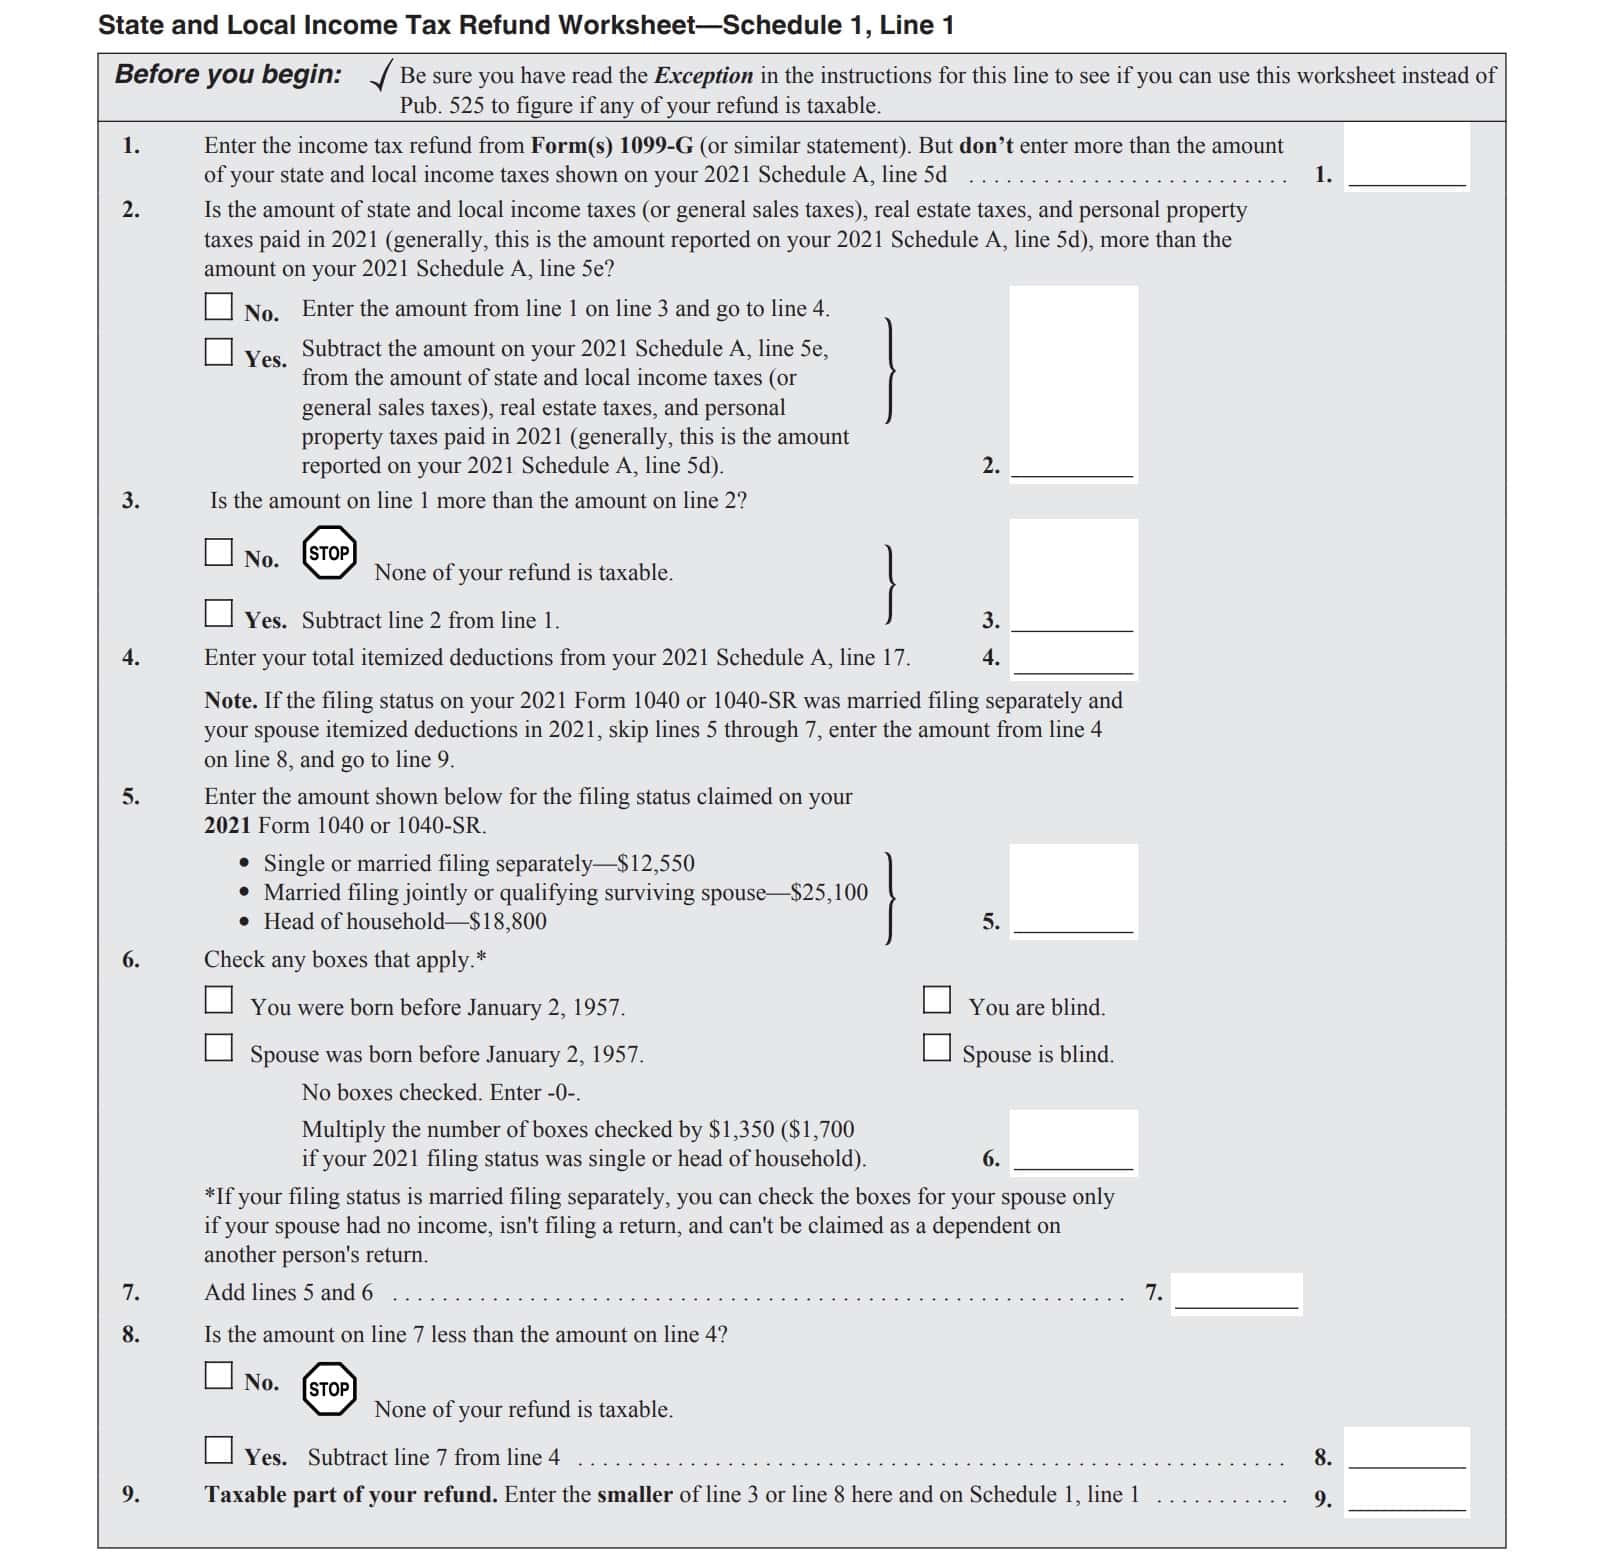 state and local income tax refund worksheet